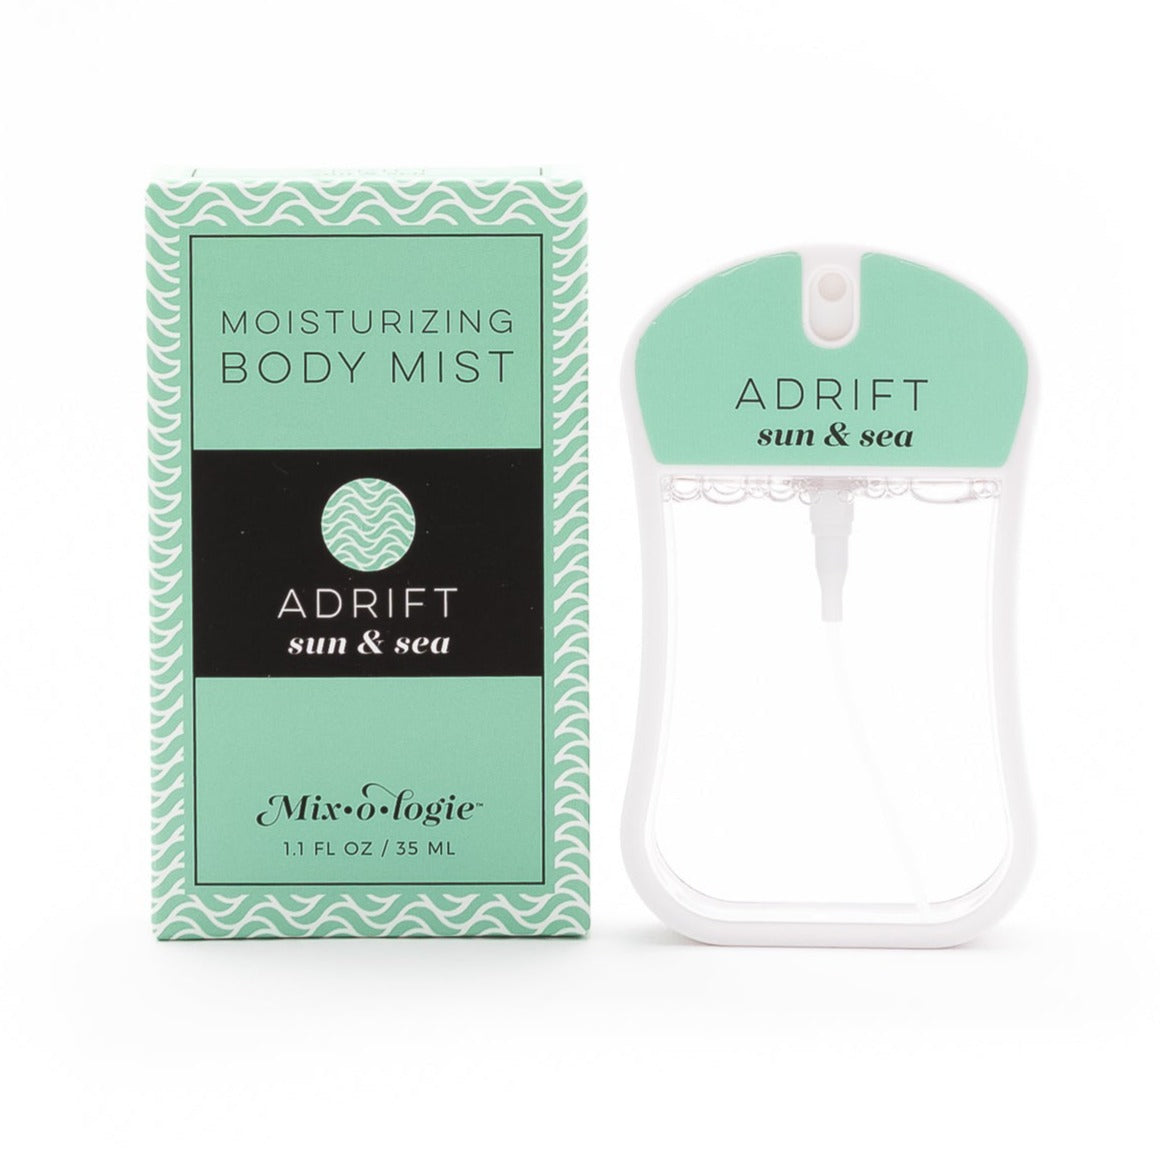 Adrift (Sun & Sea) moisturizing body mist in light green color box and spray bottle with light green color and clear liquid. Spray bottle has 1.1 fl ox or 35 mL. Box and spray bottle have a white background